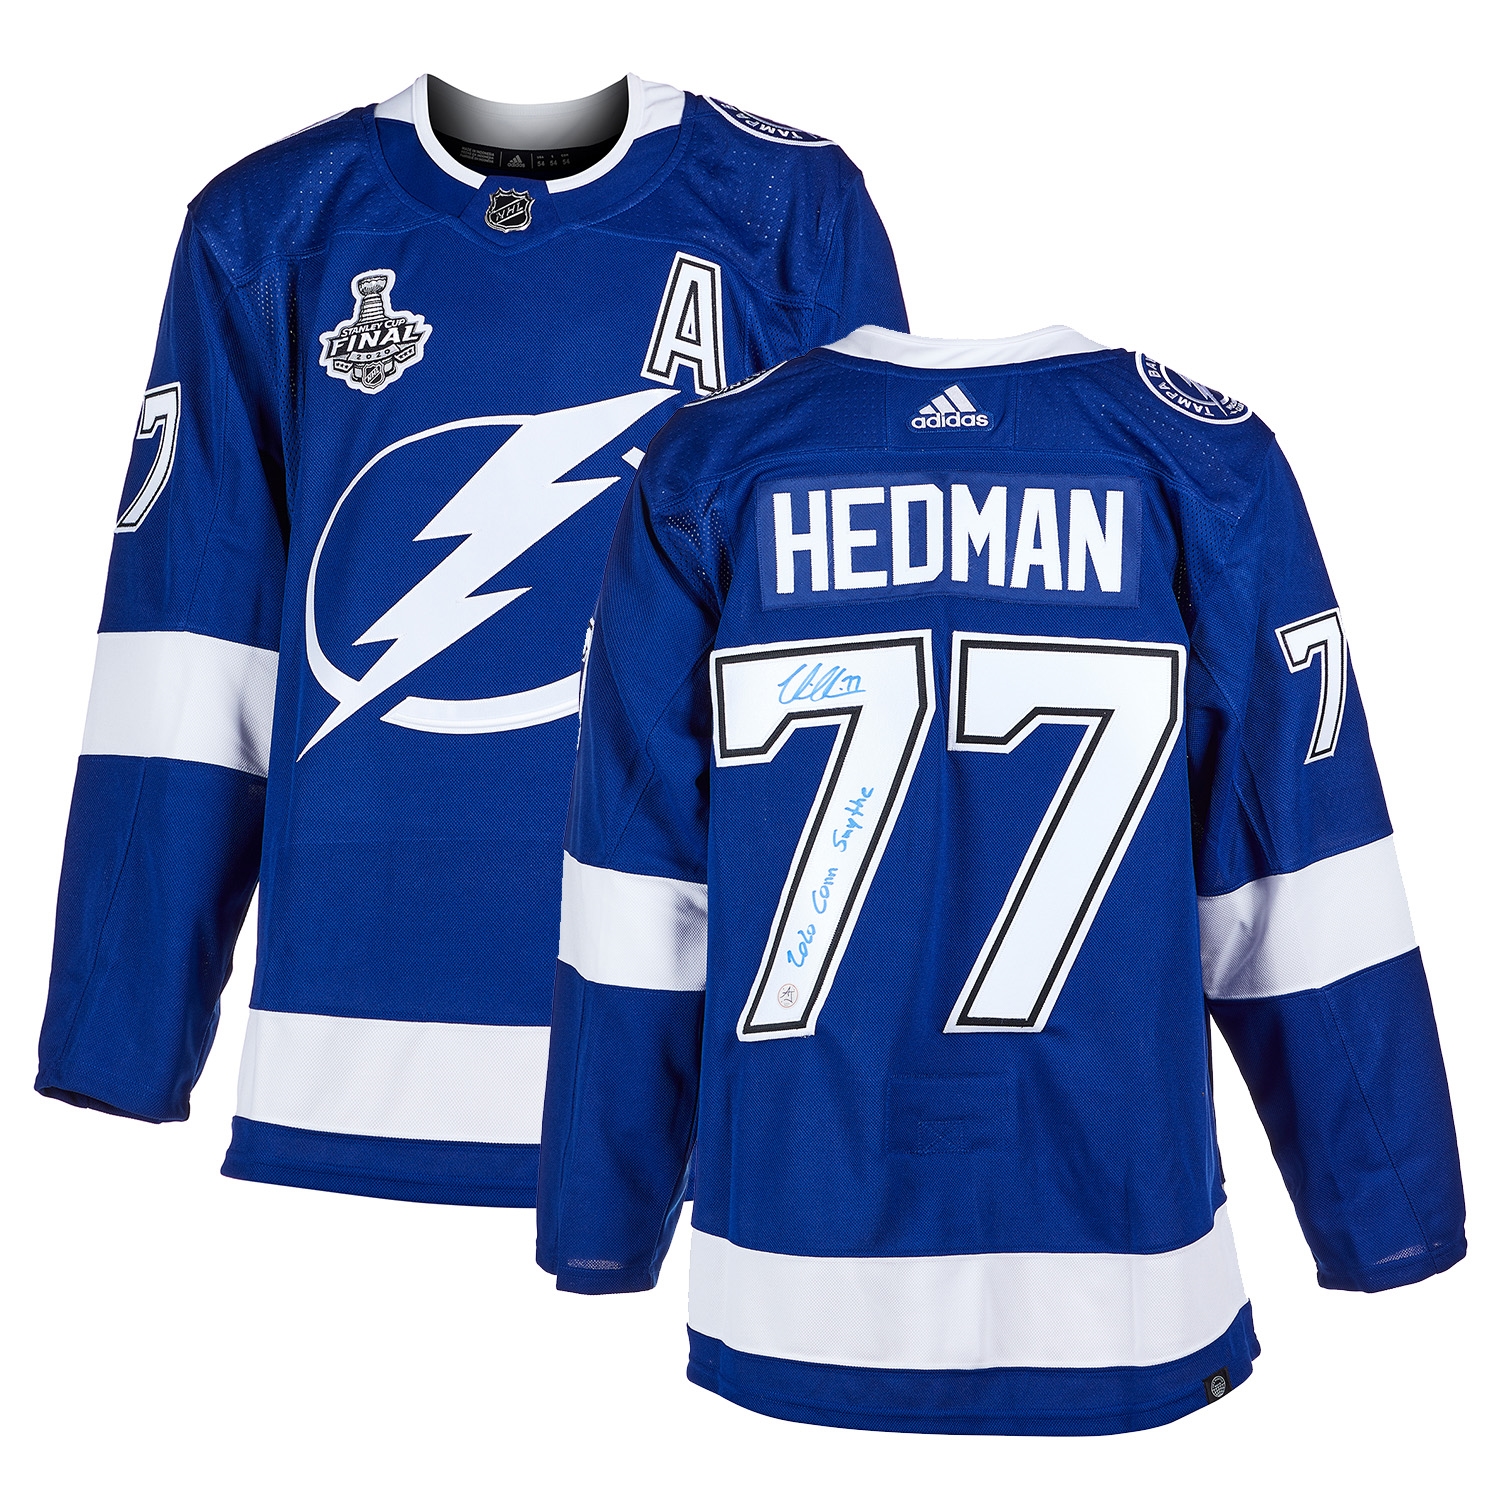 Victor Hedman Tampa Bay Lightning Signed & Inscribed 2020 Cup adidas Jersey